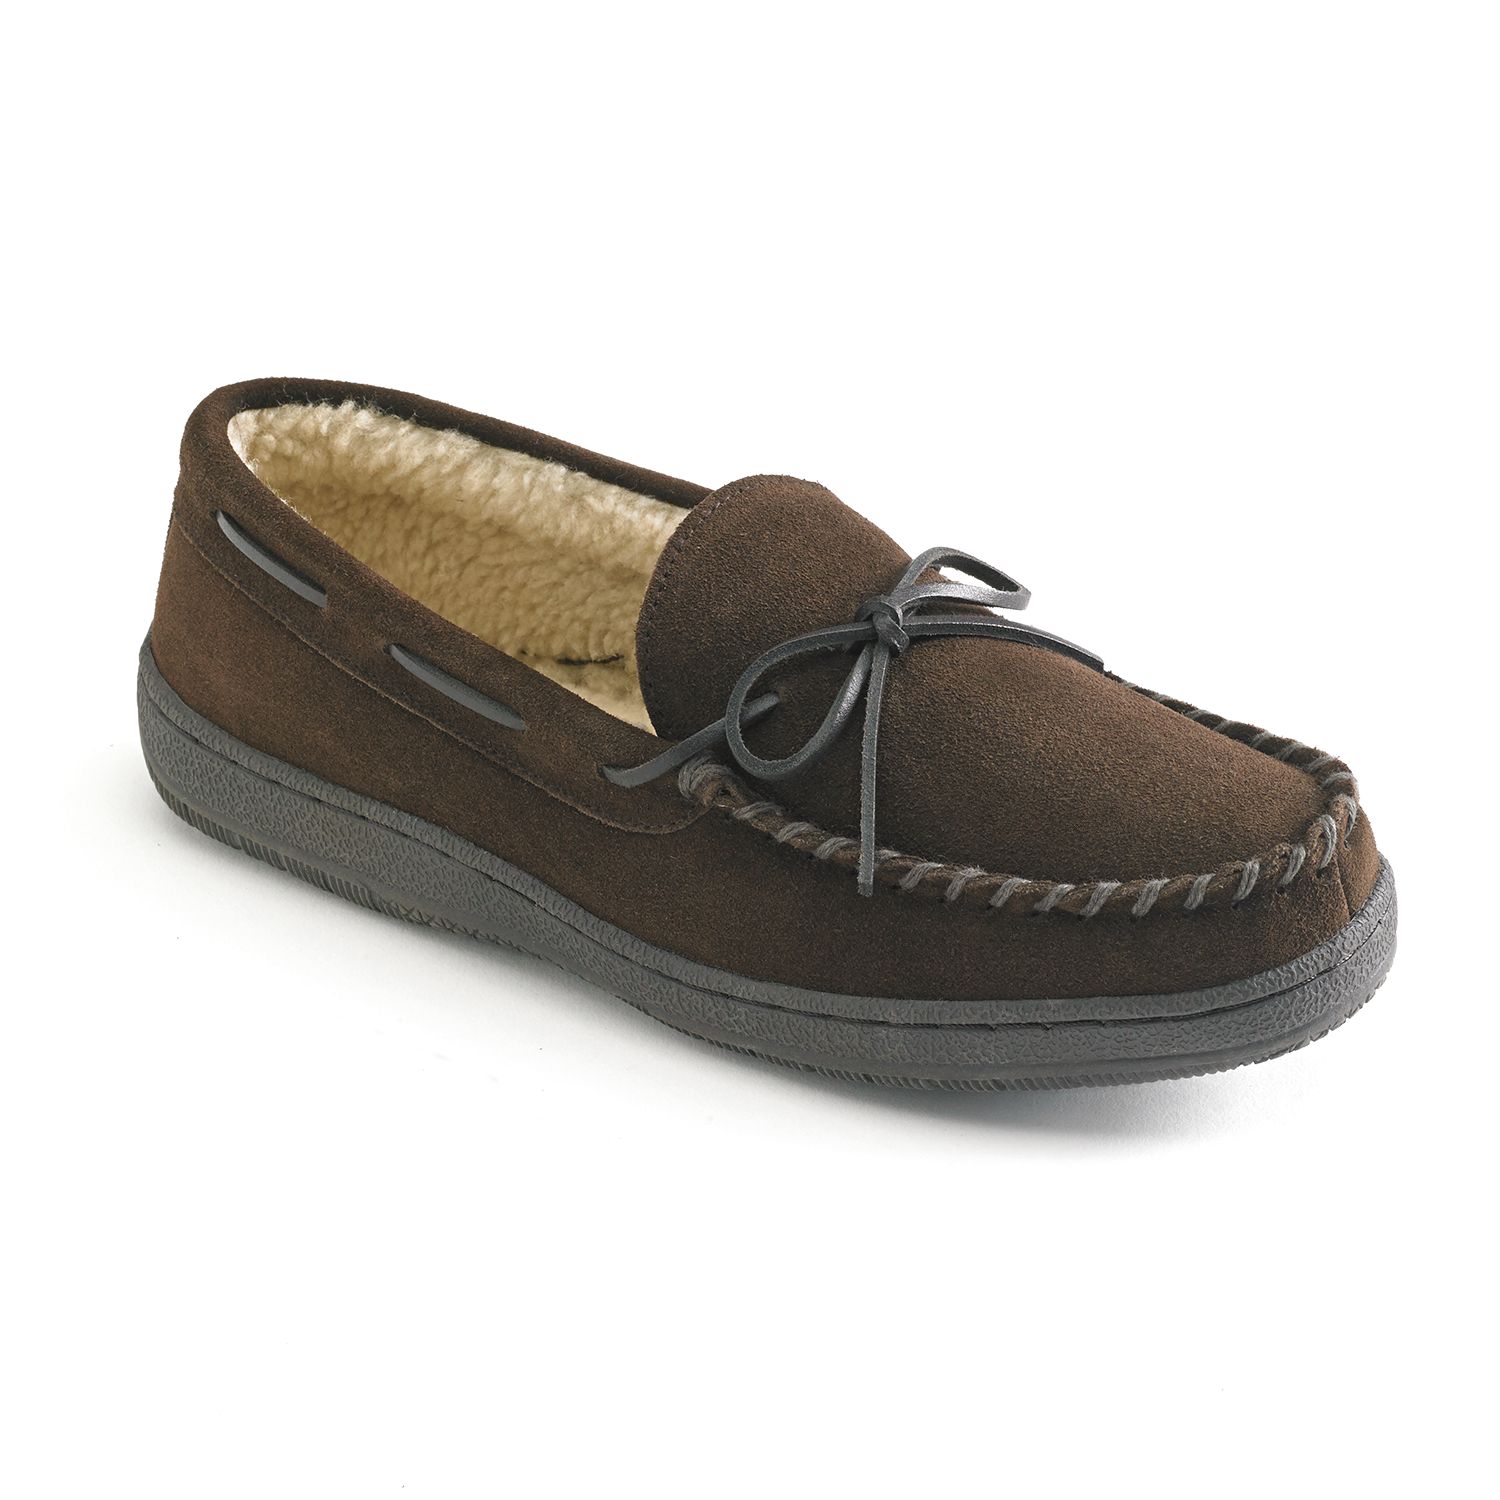 Image for Hideaways by L.B. Evans Morgan Men's Suede Moccasin Slippers at Kohl's.